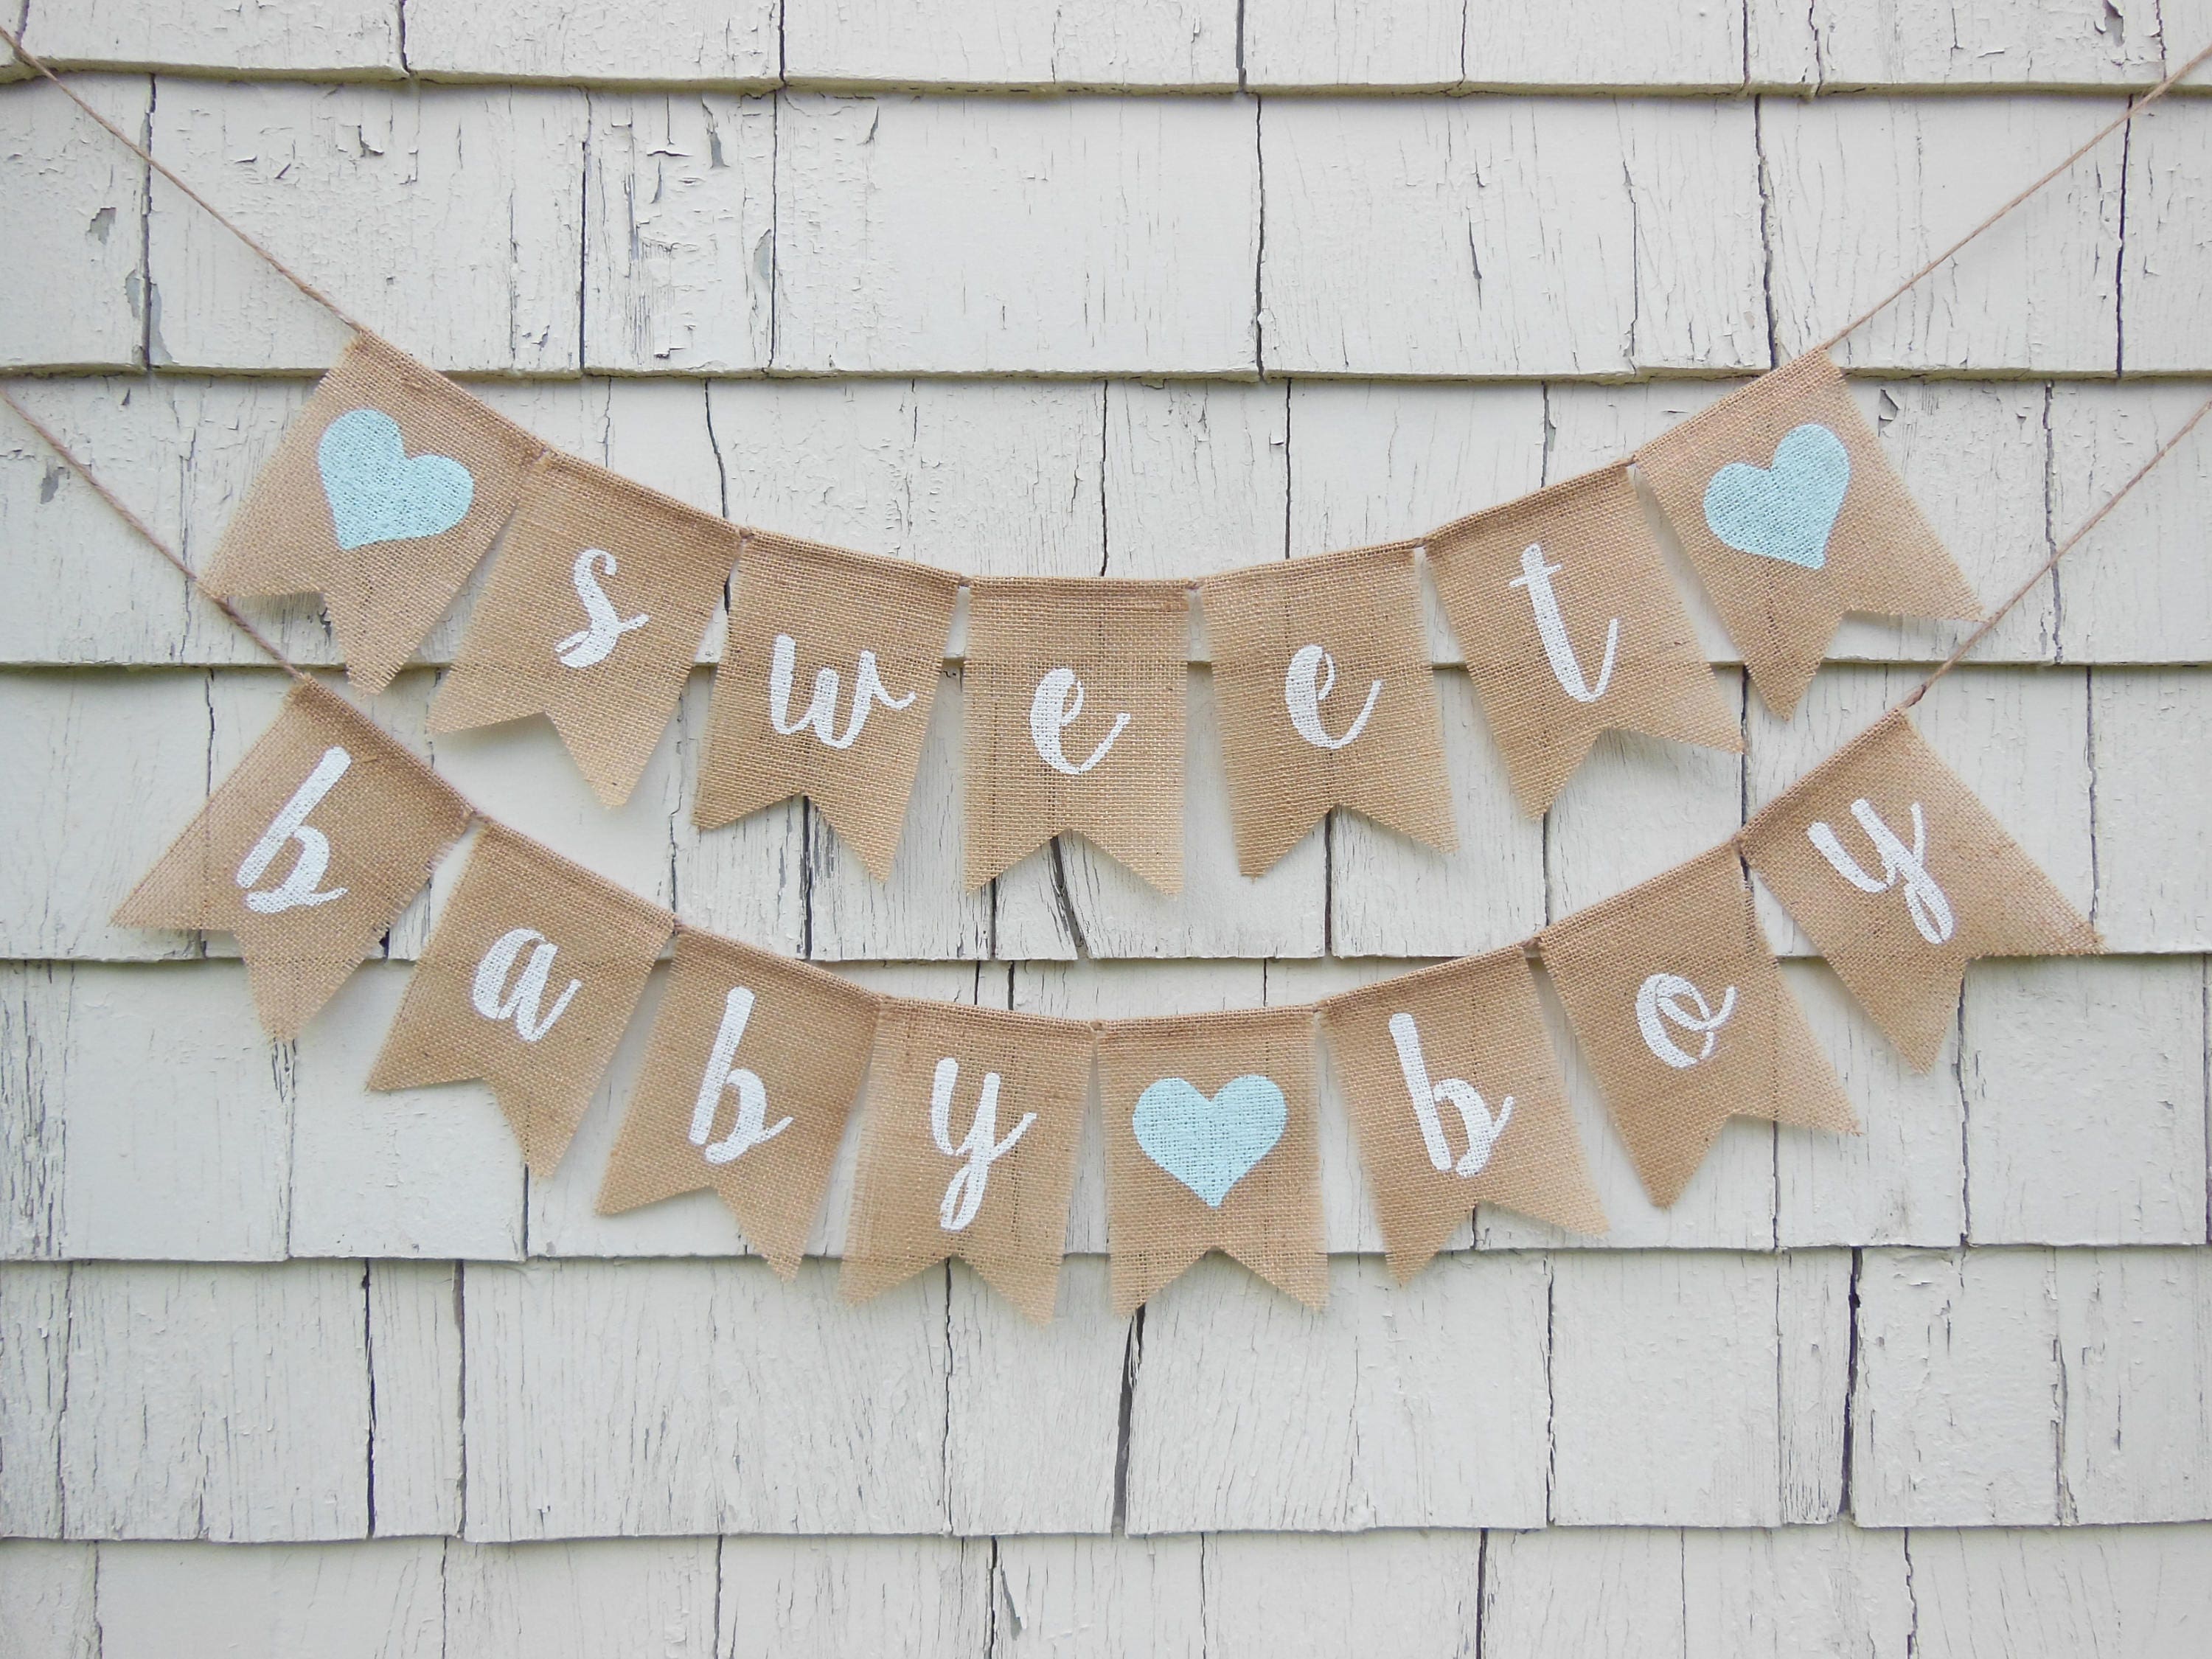 Baby Shower Banners